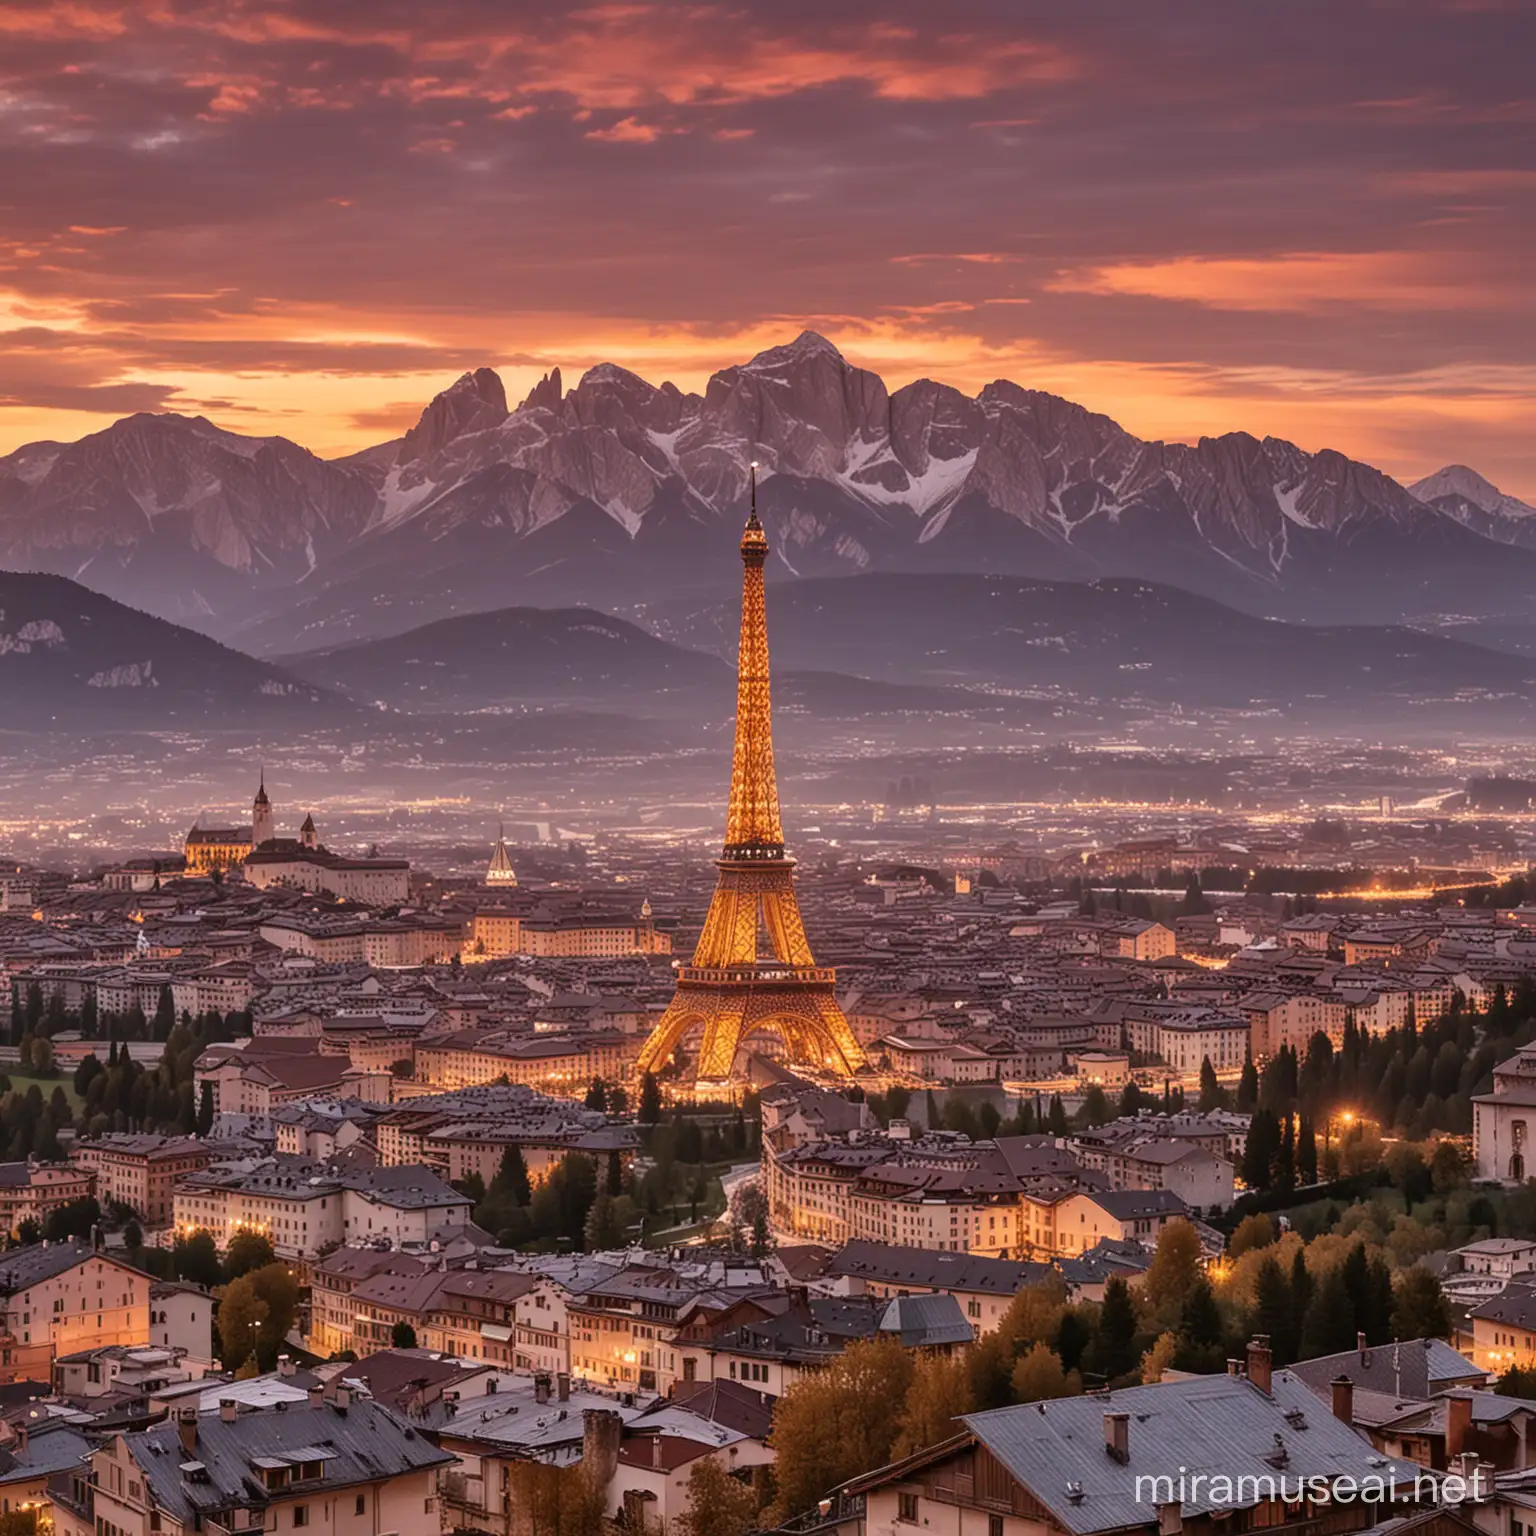 creates the image of a sunset over the Dolomites with the Eiffel Tower in the background